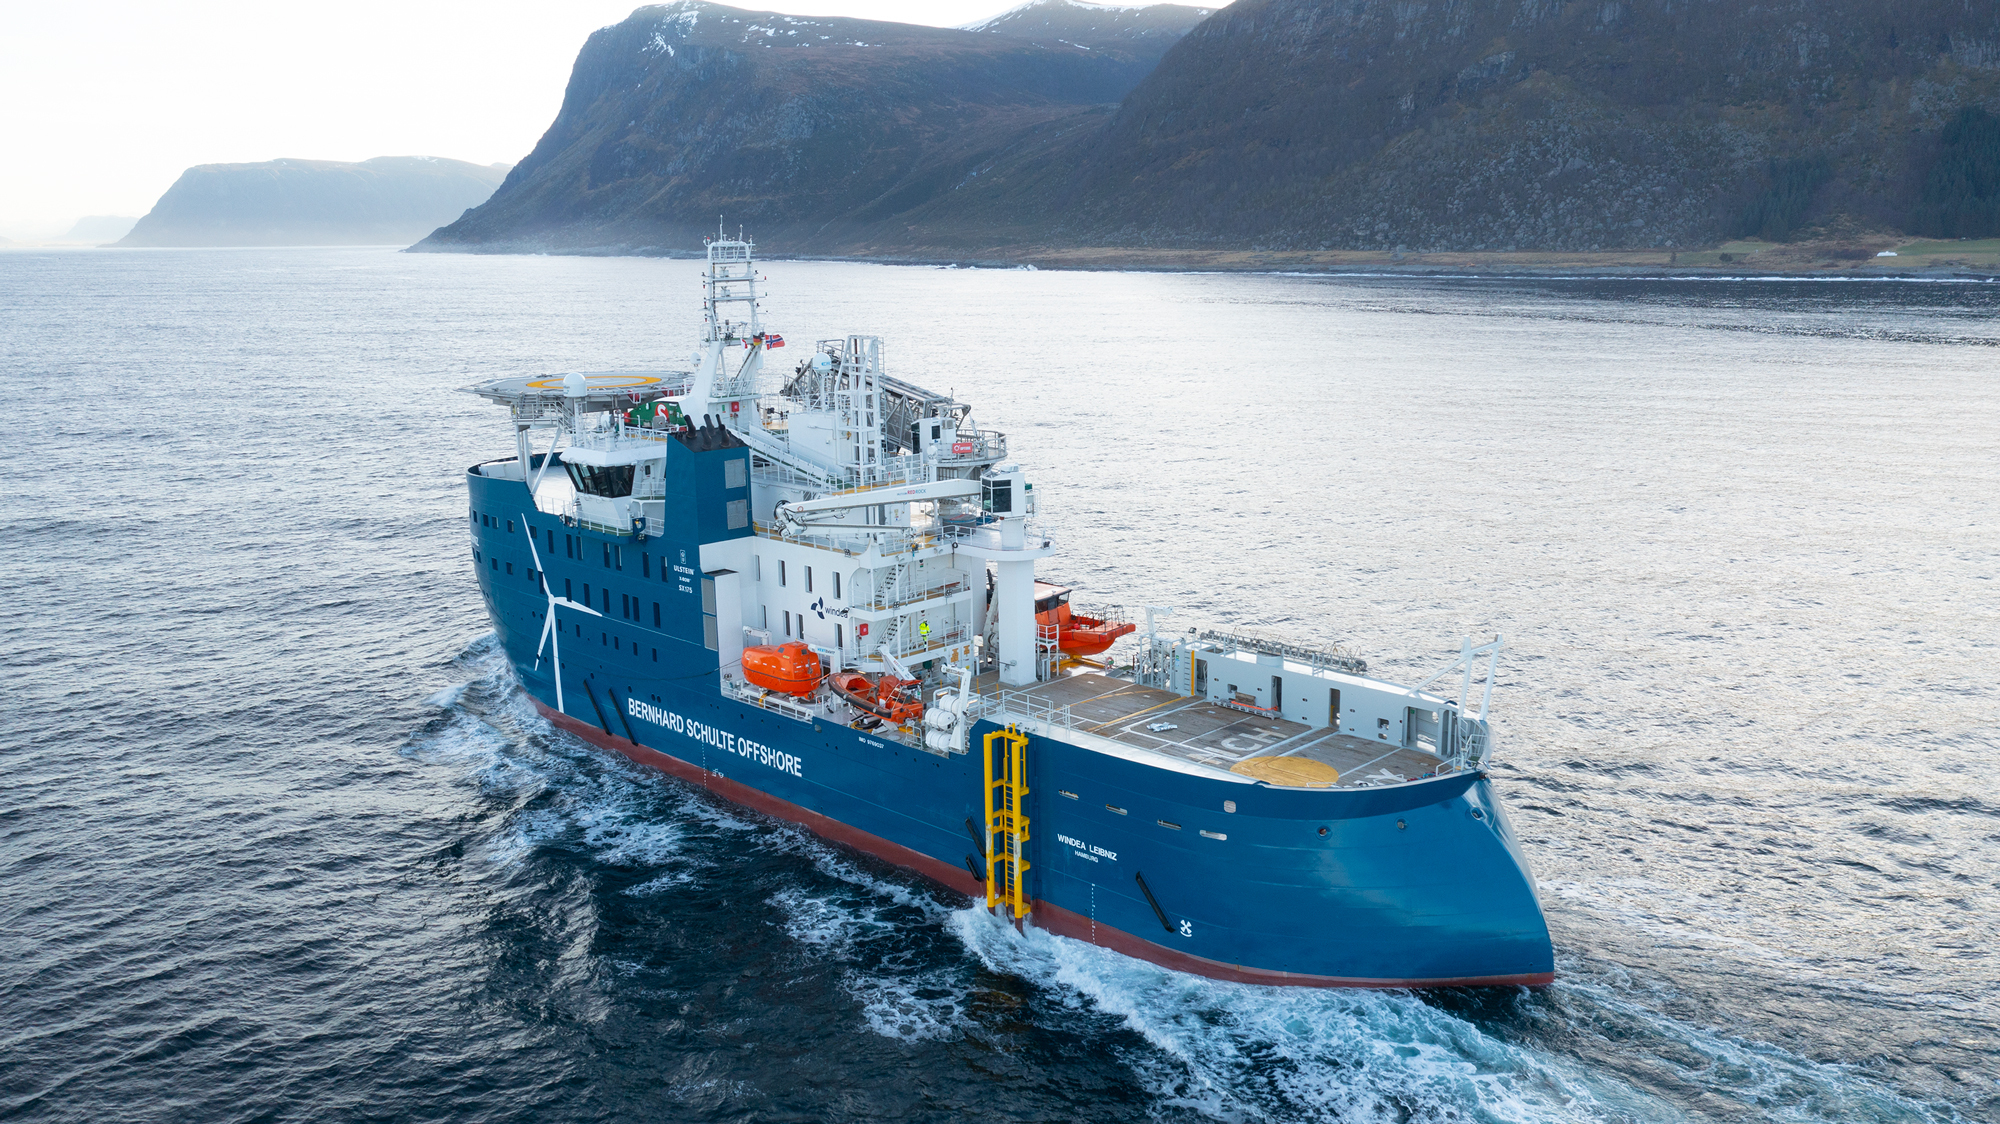 With an adjustable pedestal for the North Sea and an aft pedestal for the Baltic Sea, the Windea Leibniz has increased her flexibility in offshore wind services. Photo: Uavpic.com.